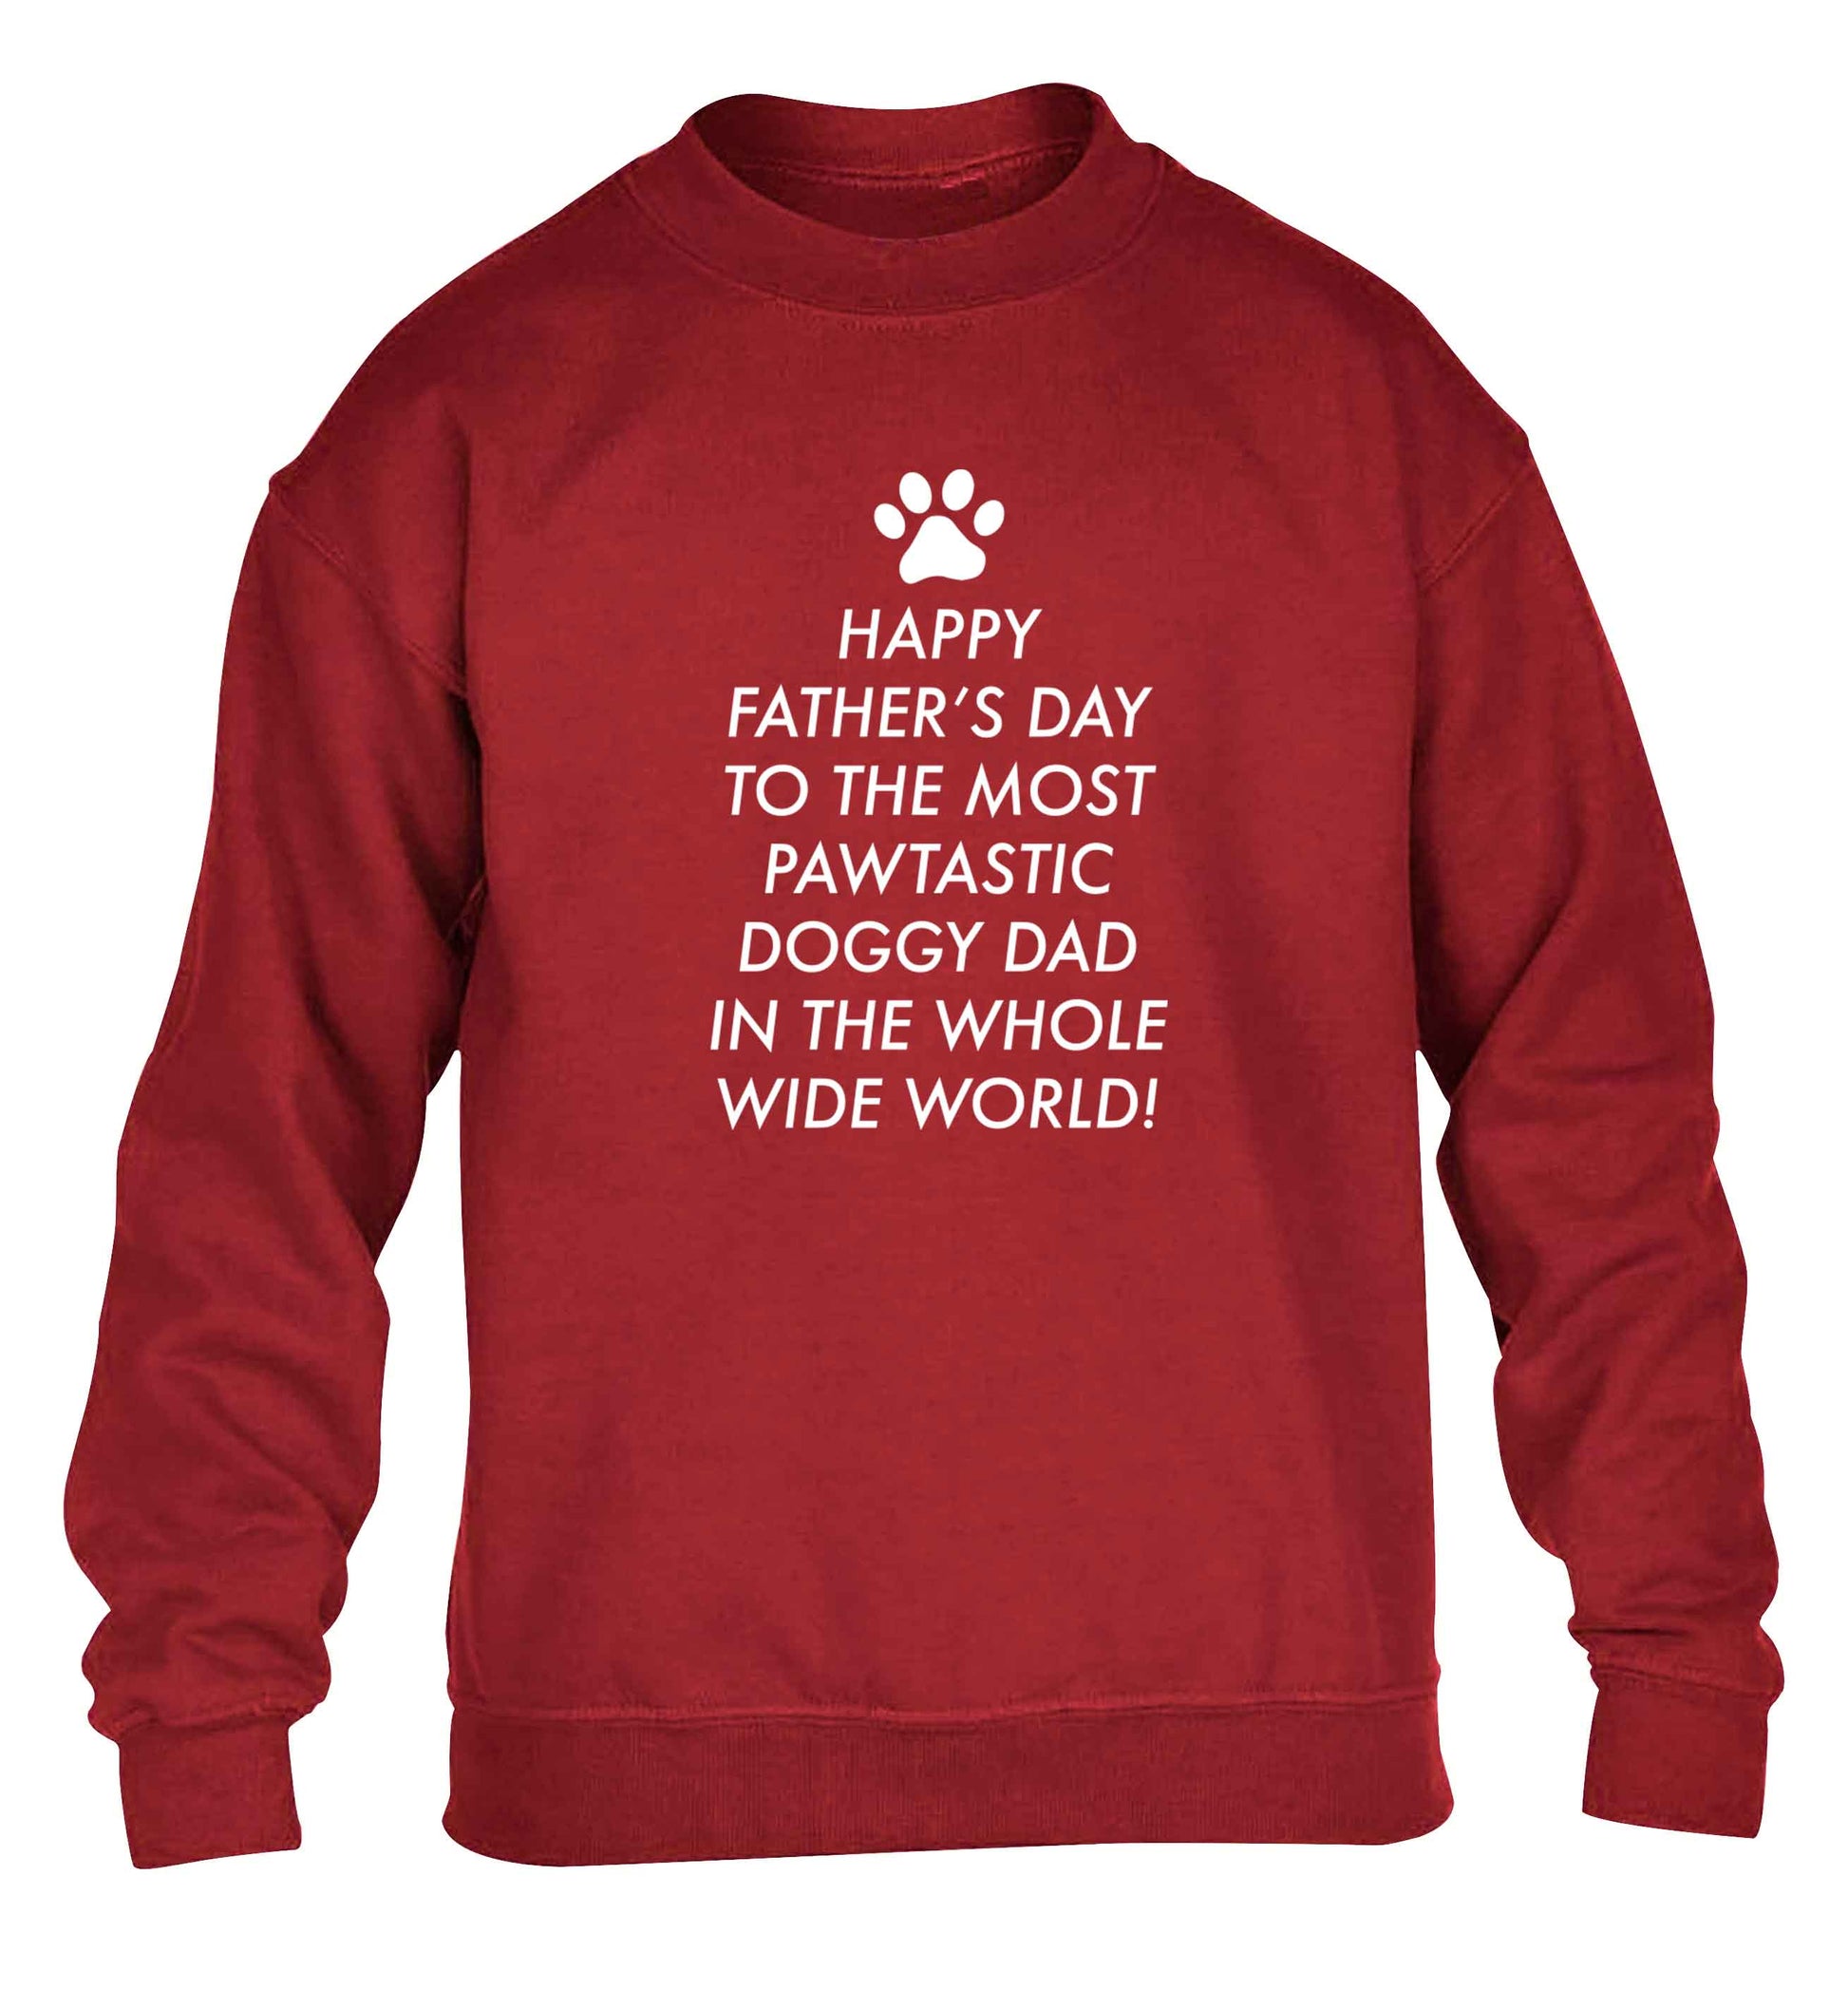 Happy Father's day to the most pawtastic doggy dad in the whole wide world!children's grey sweater 12-13 Years